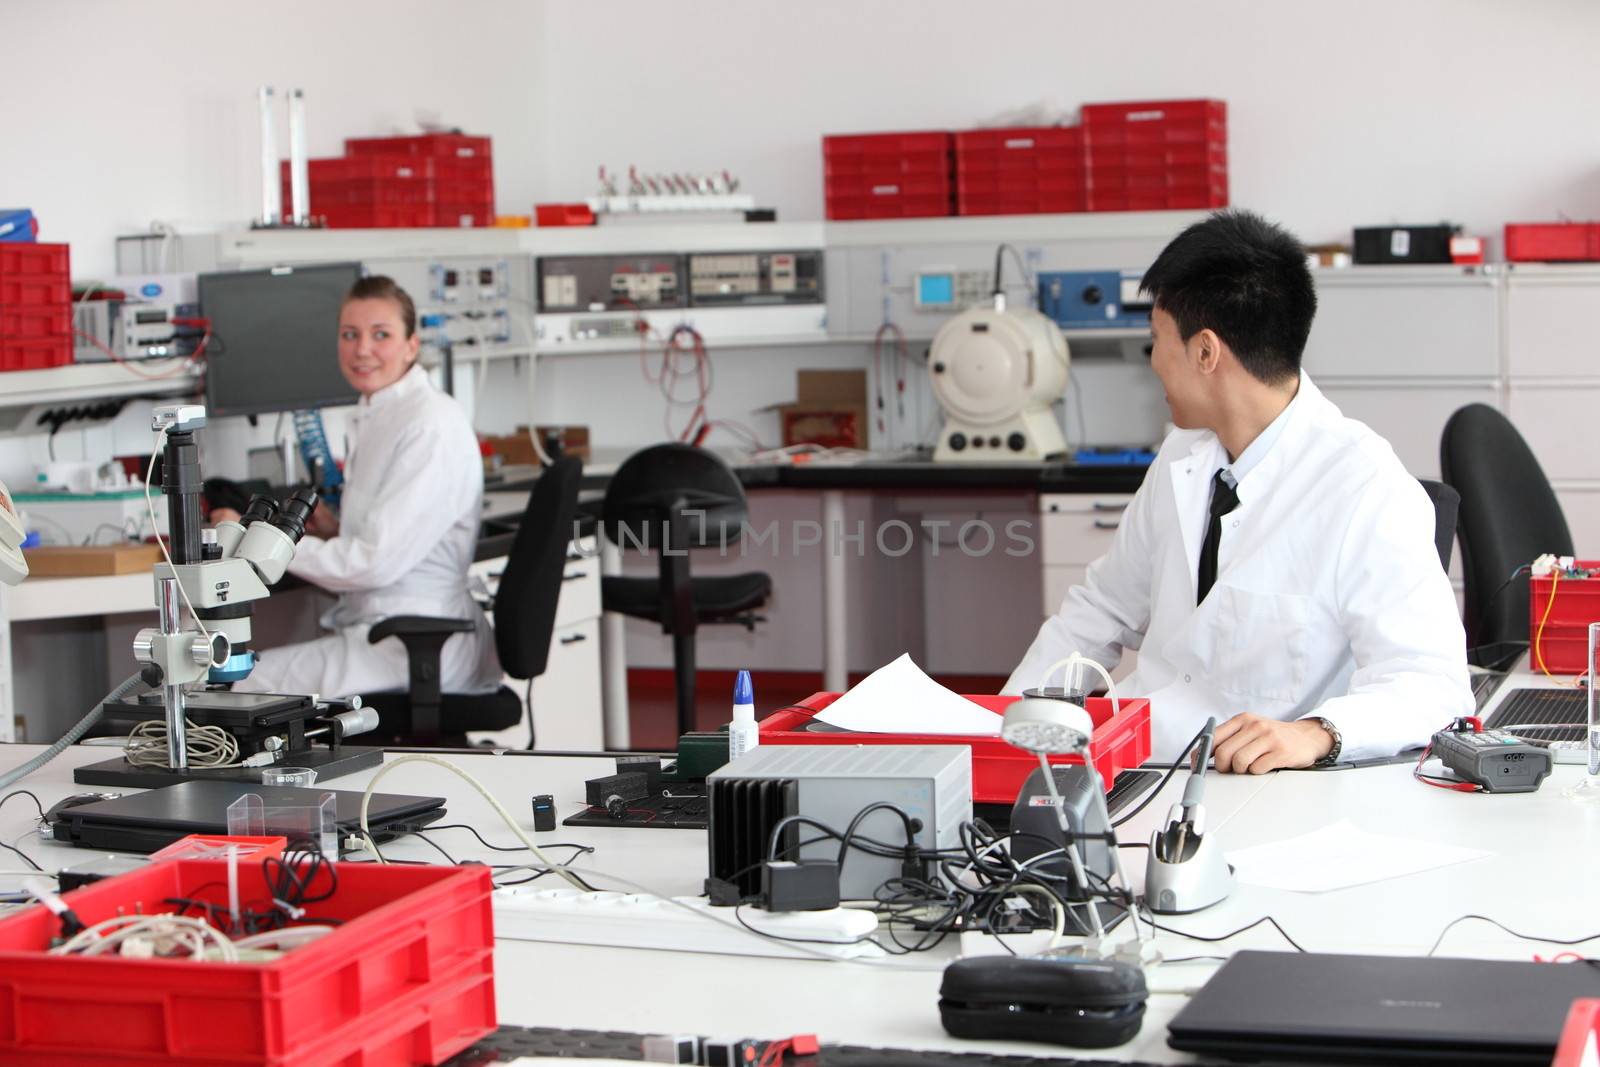 A male and female technician working together in a modern chemical laboratory performing tests for medical or industrial research, analysis or quality control